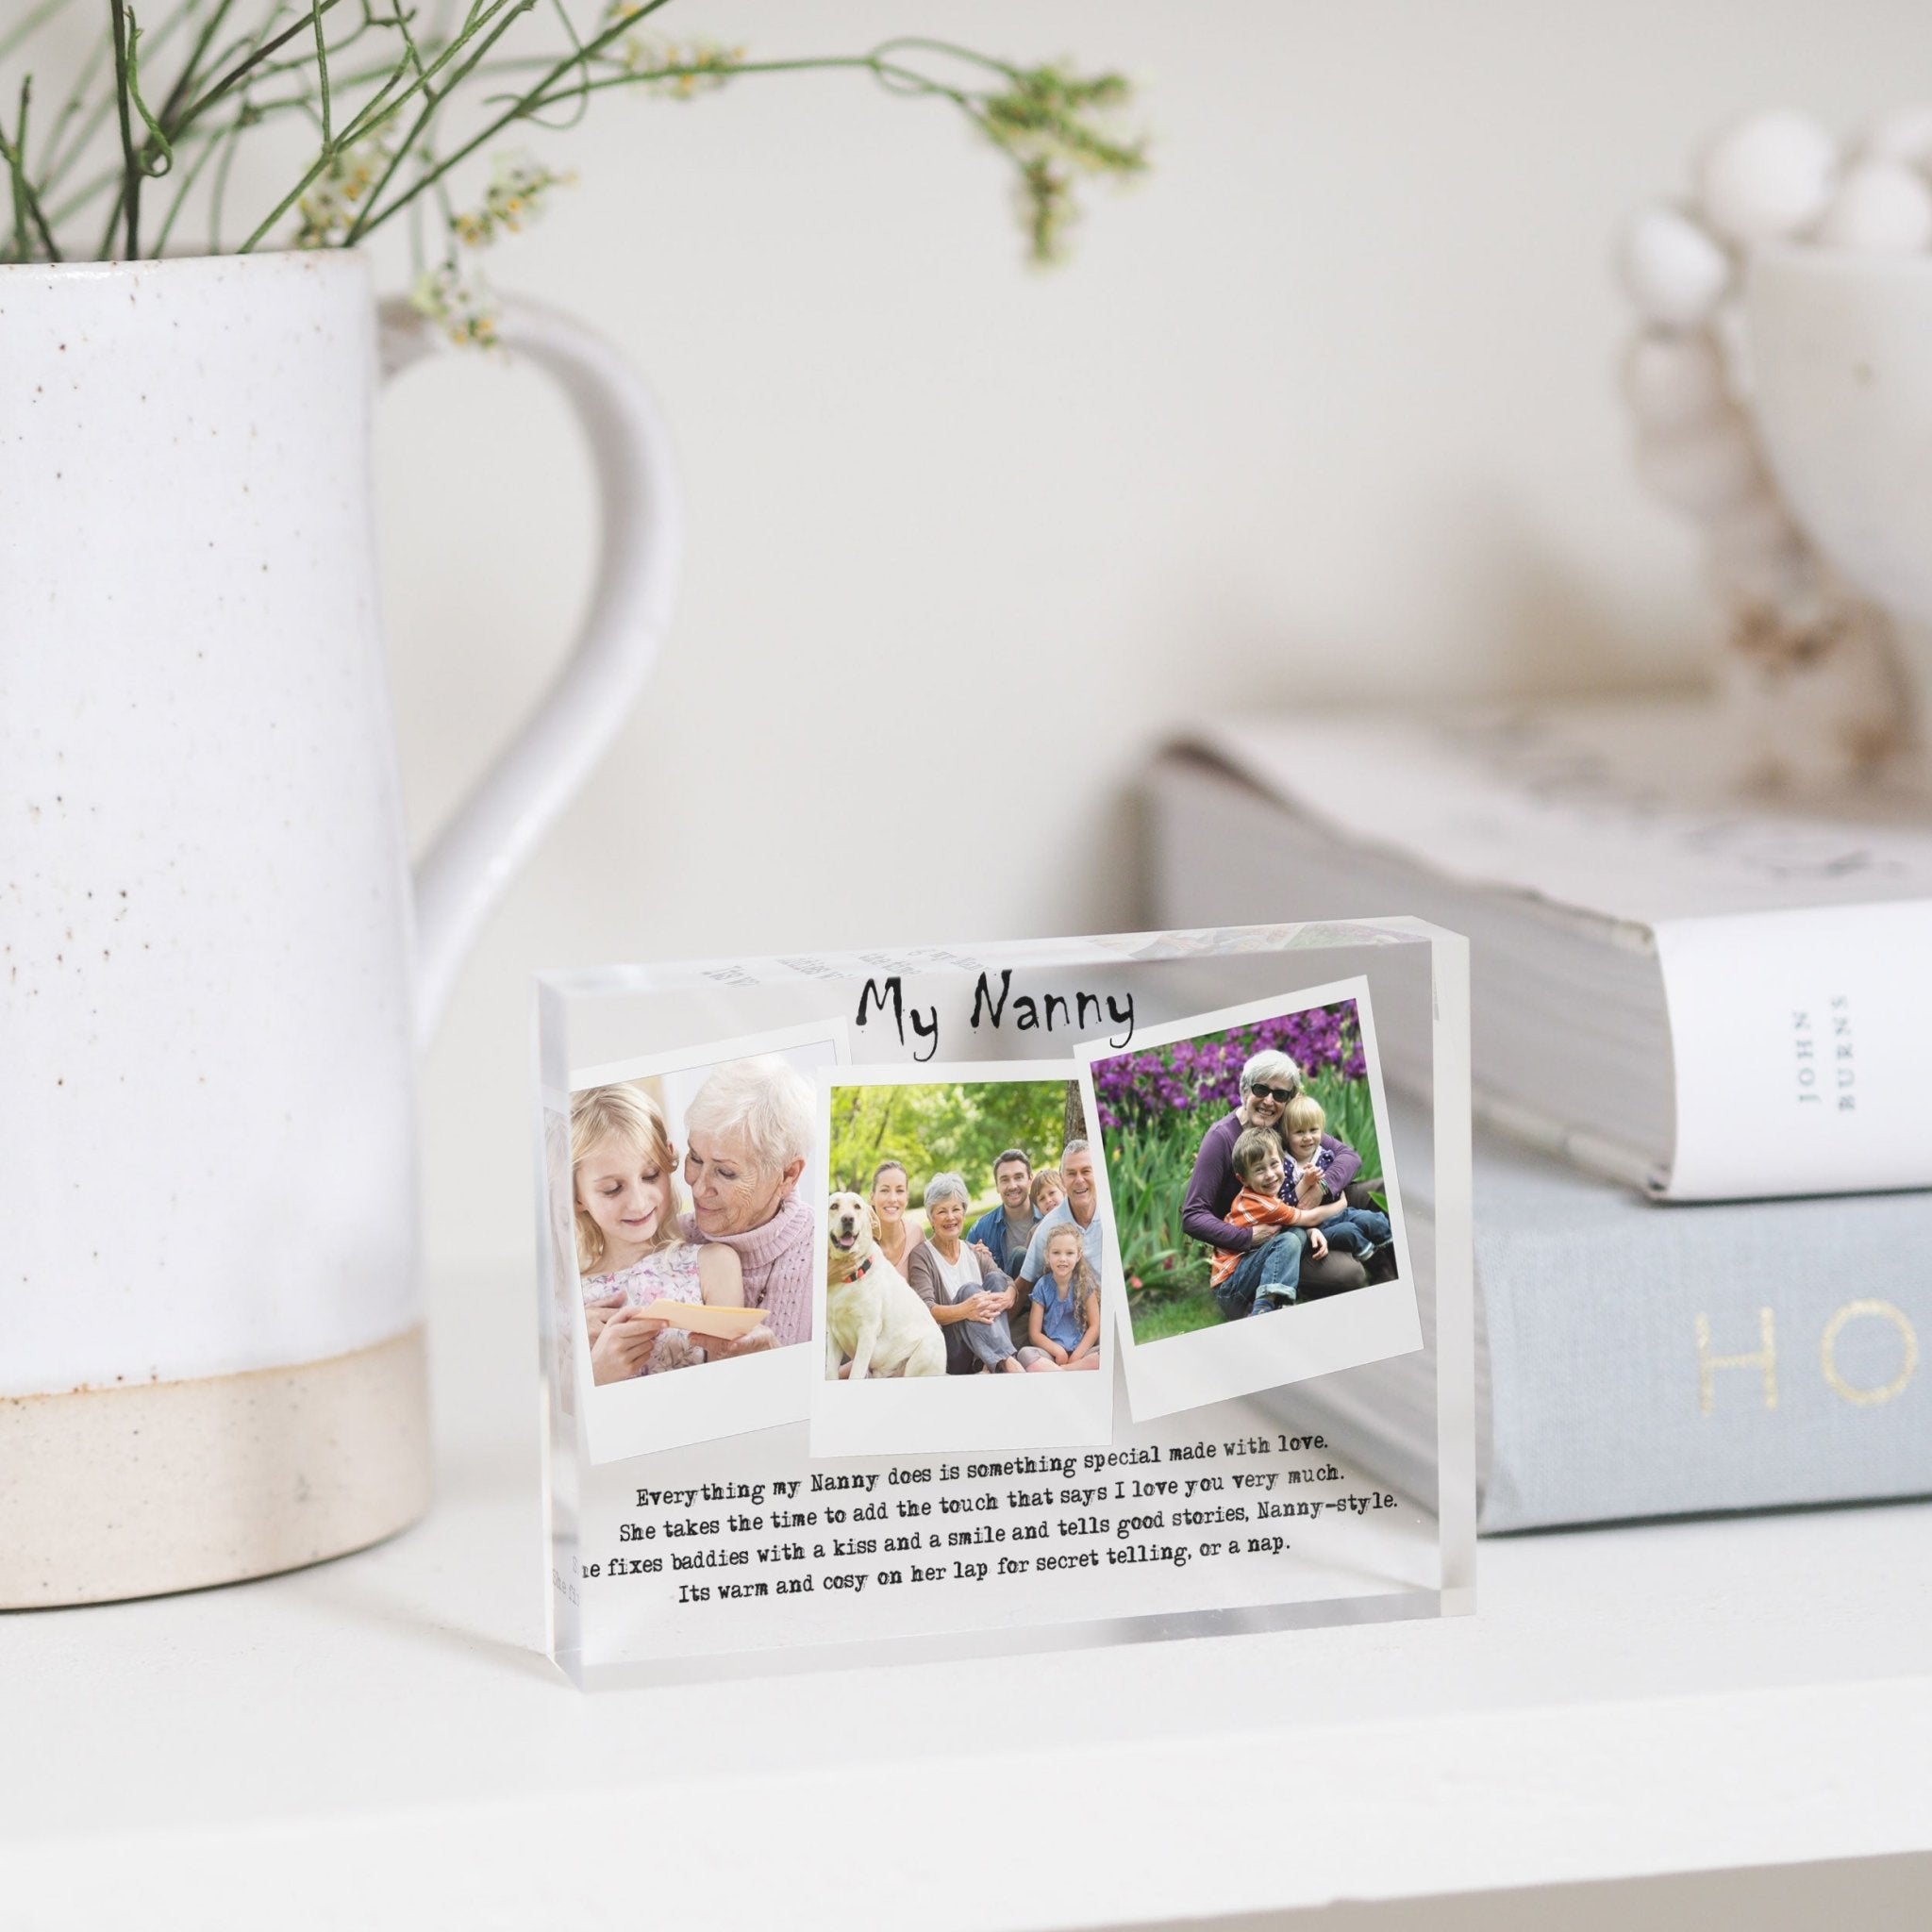 Personalised Nanny Gift | Nanny crystal clear glass | Nanny personalized photo | Nanny quotation | Nannie customized photo PhotoBlock - Unique Prints